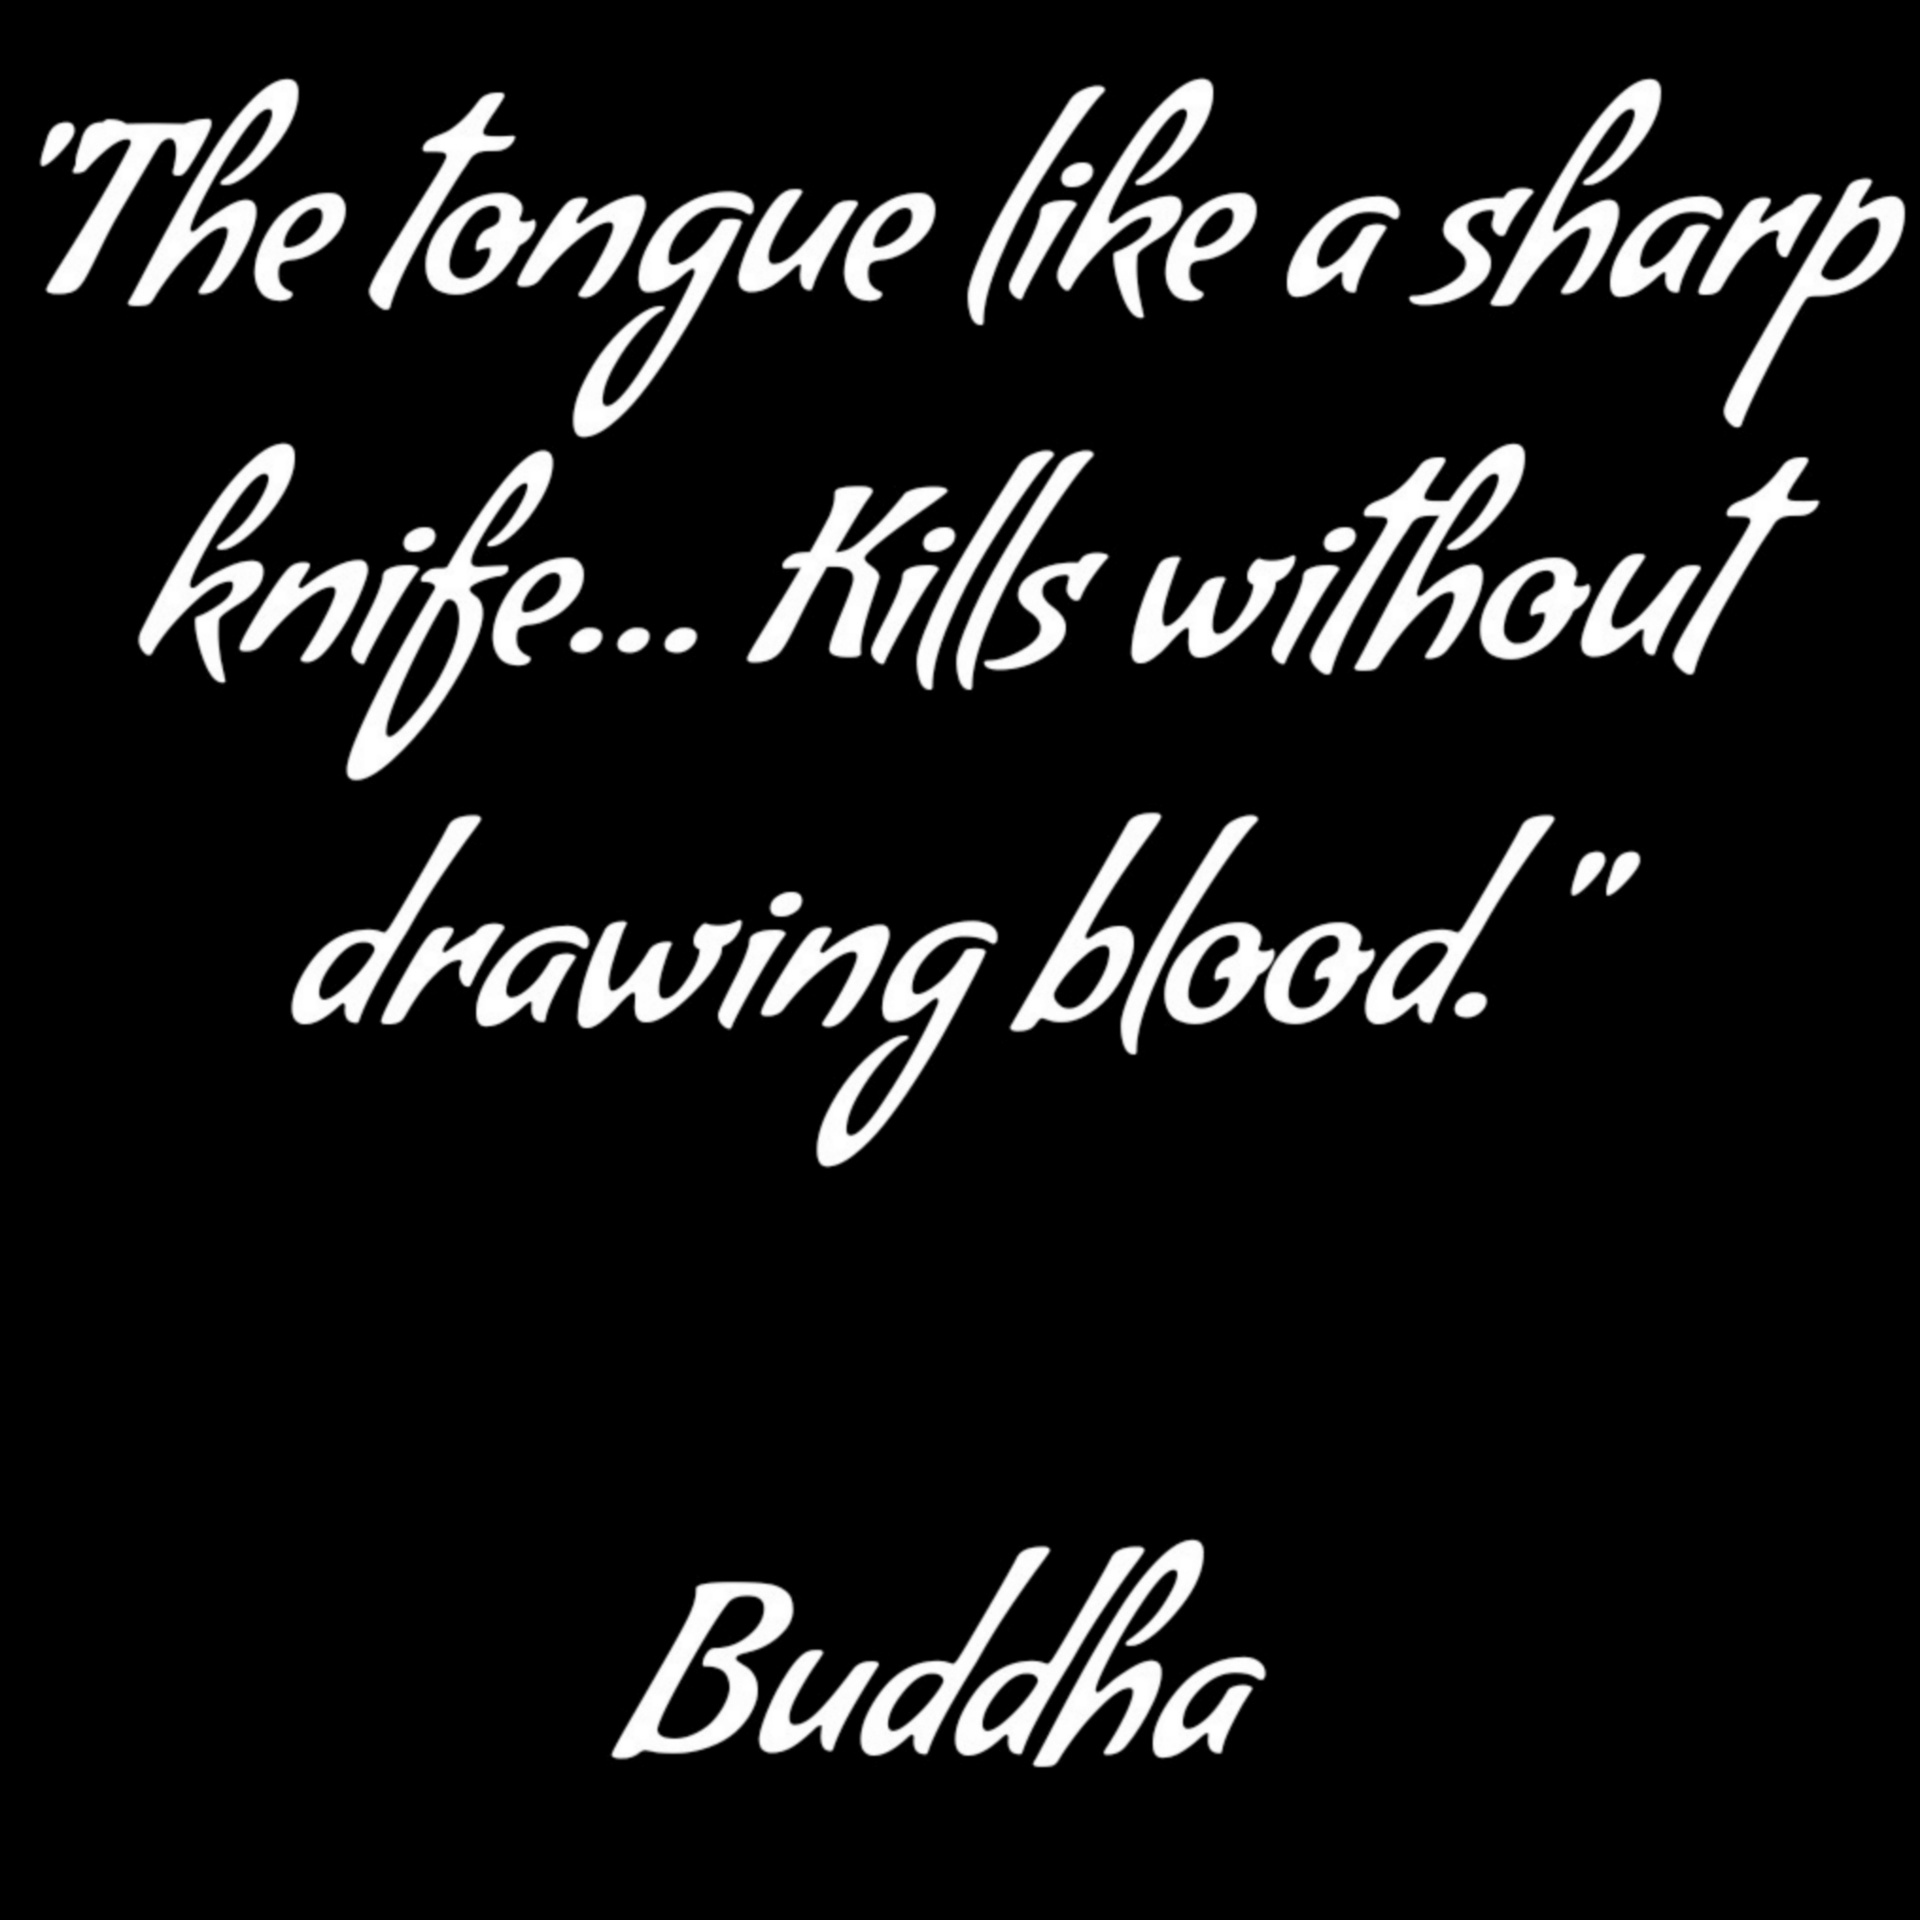 Buddha Quote On A Tongue